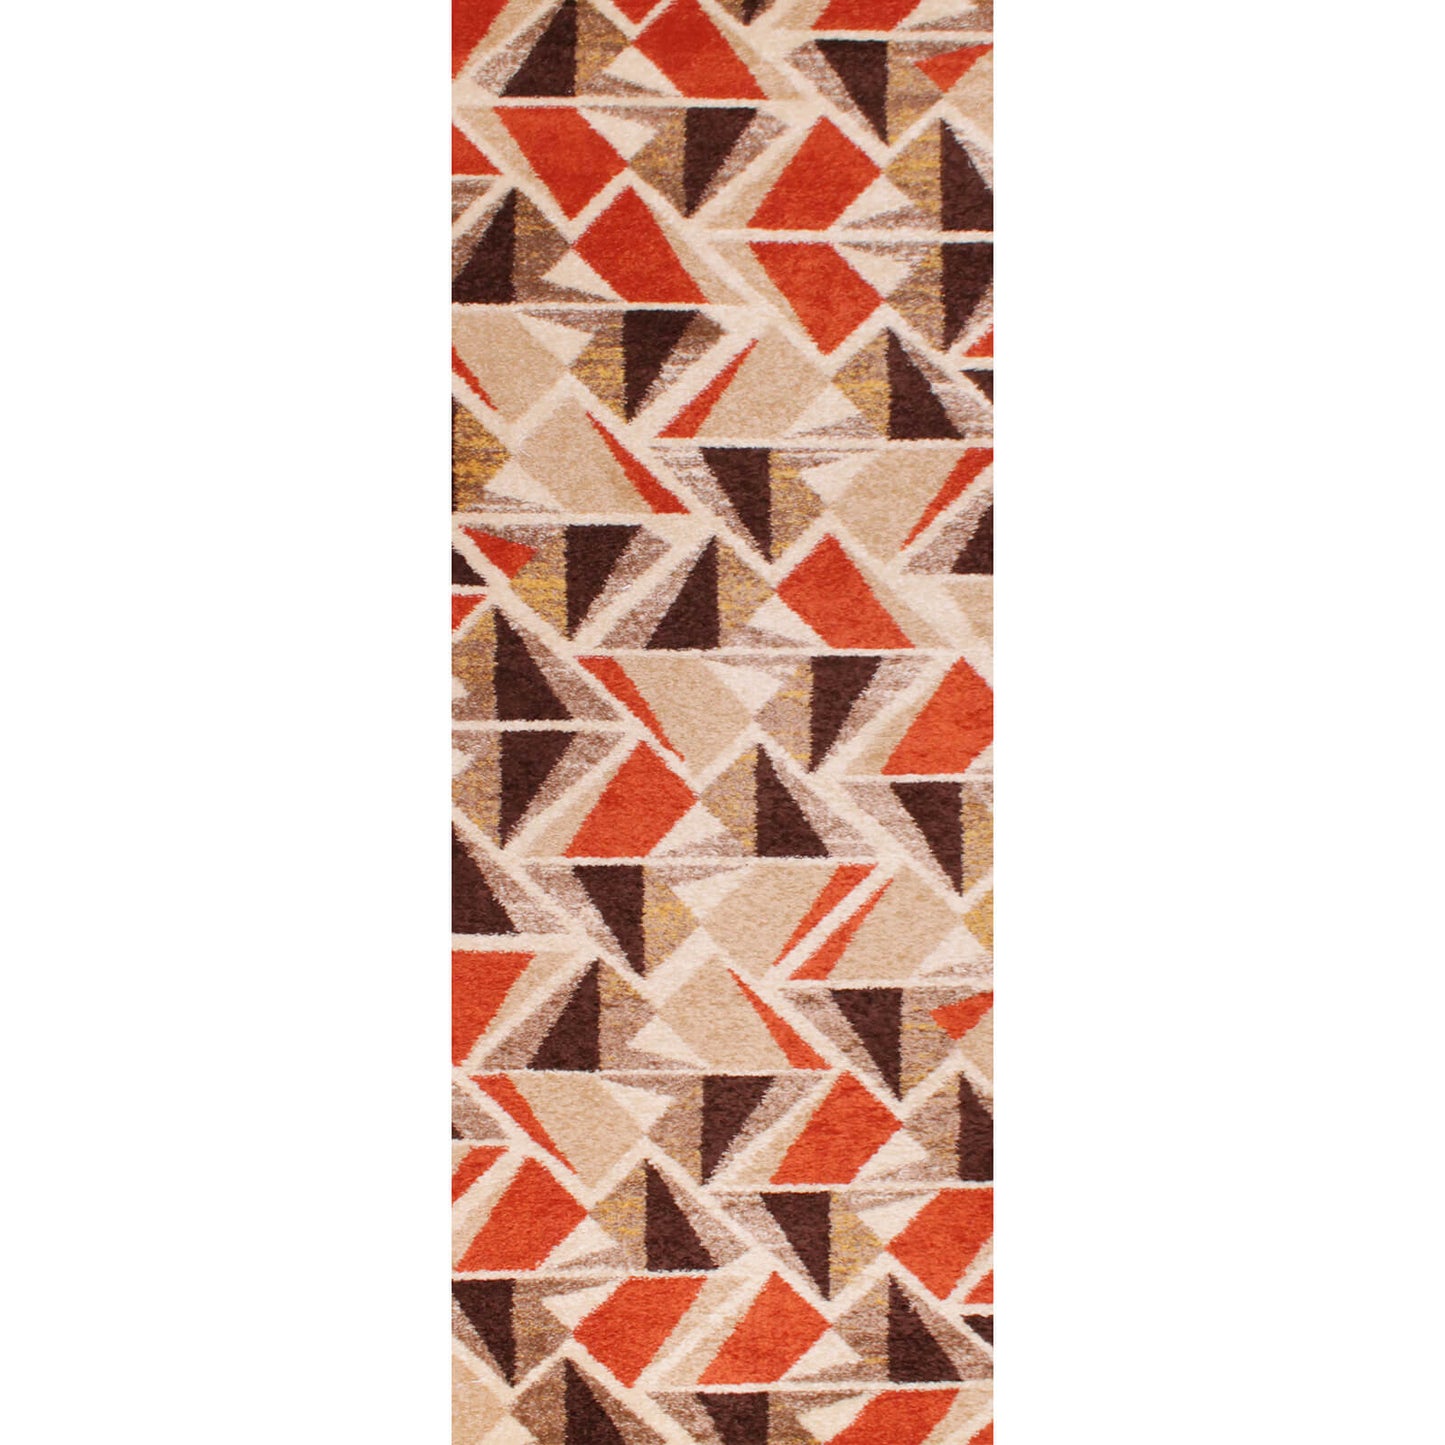 Spirit Abstract Orange and Terracotta Rugs